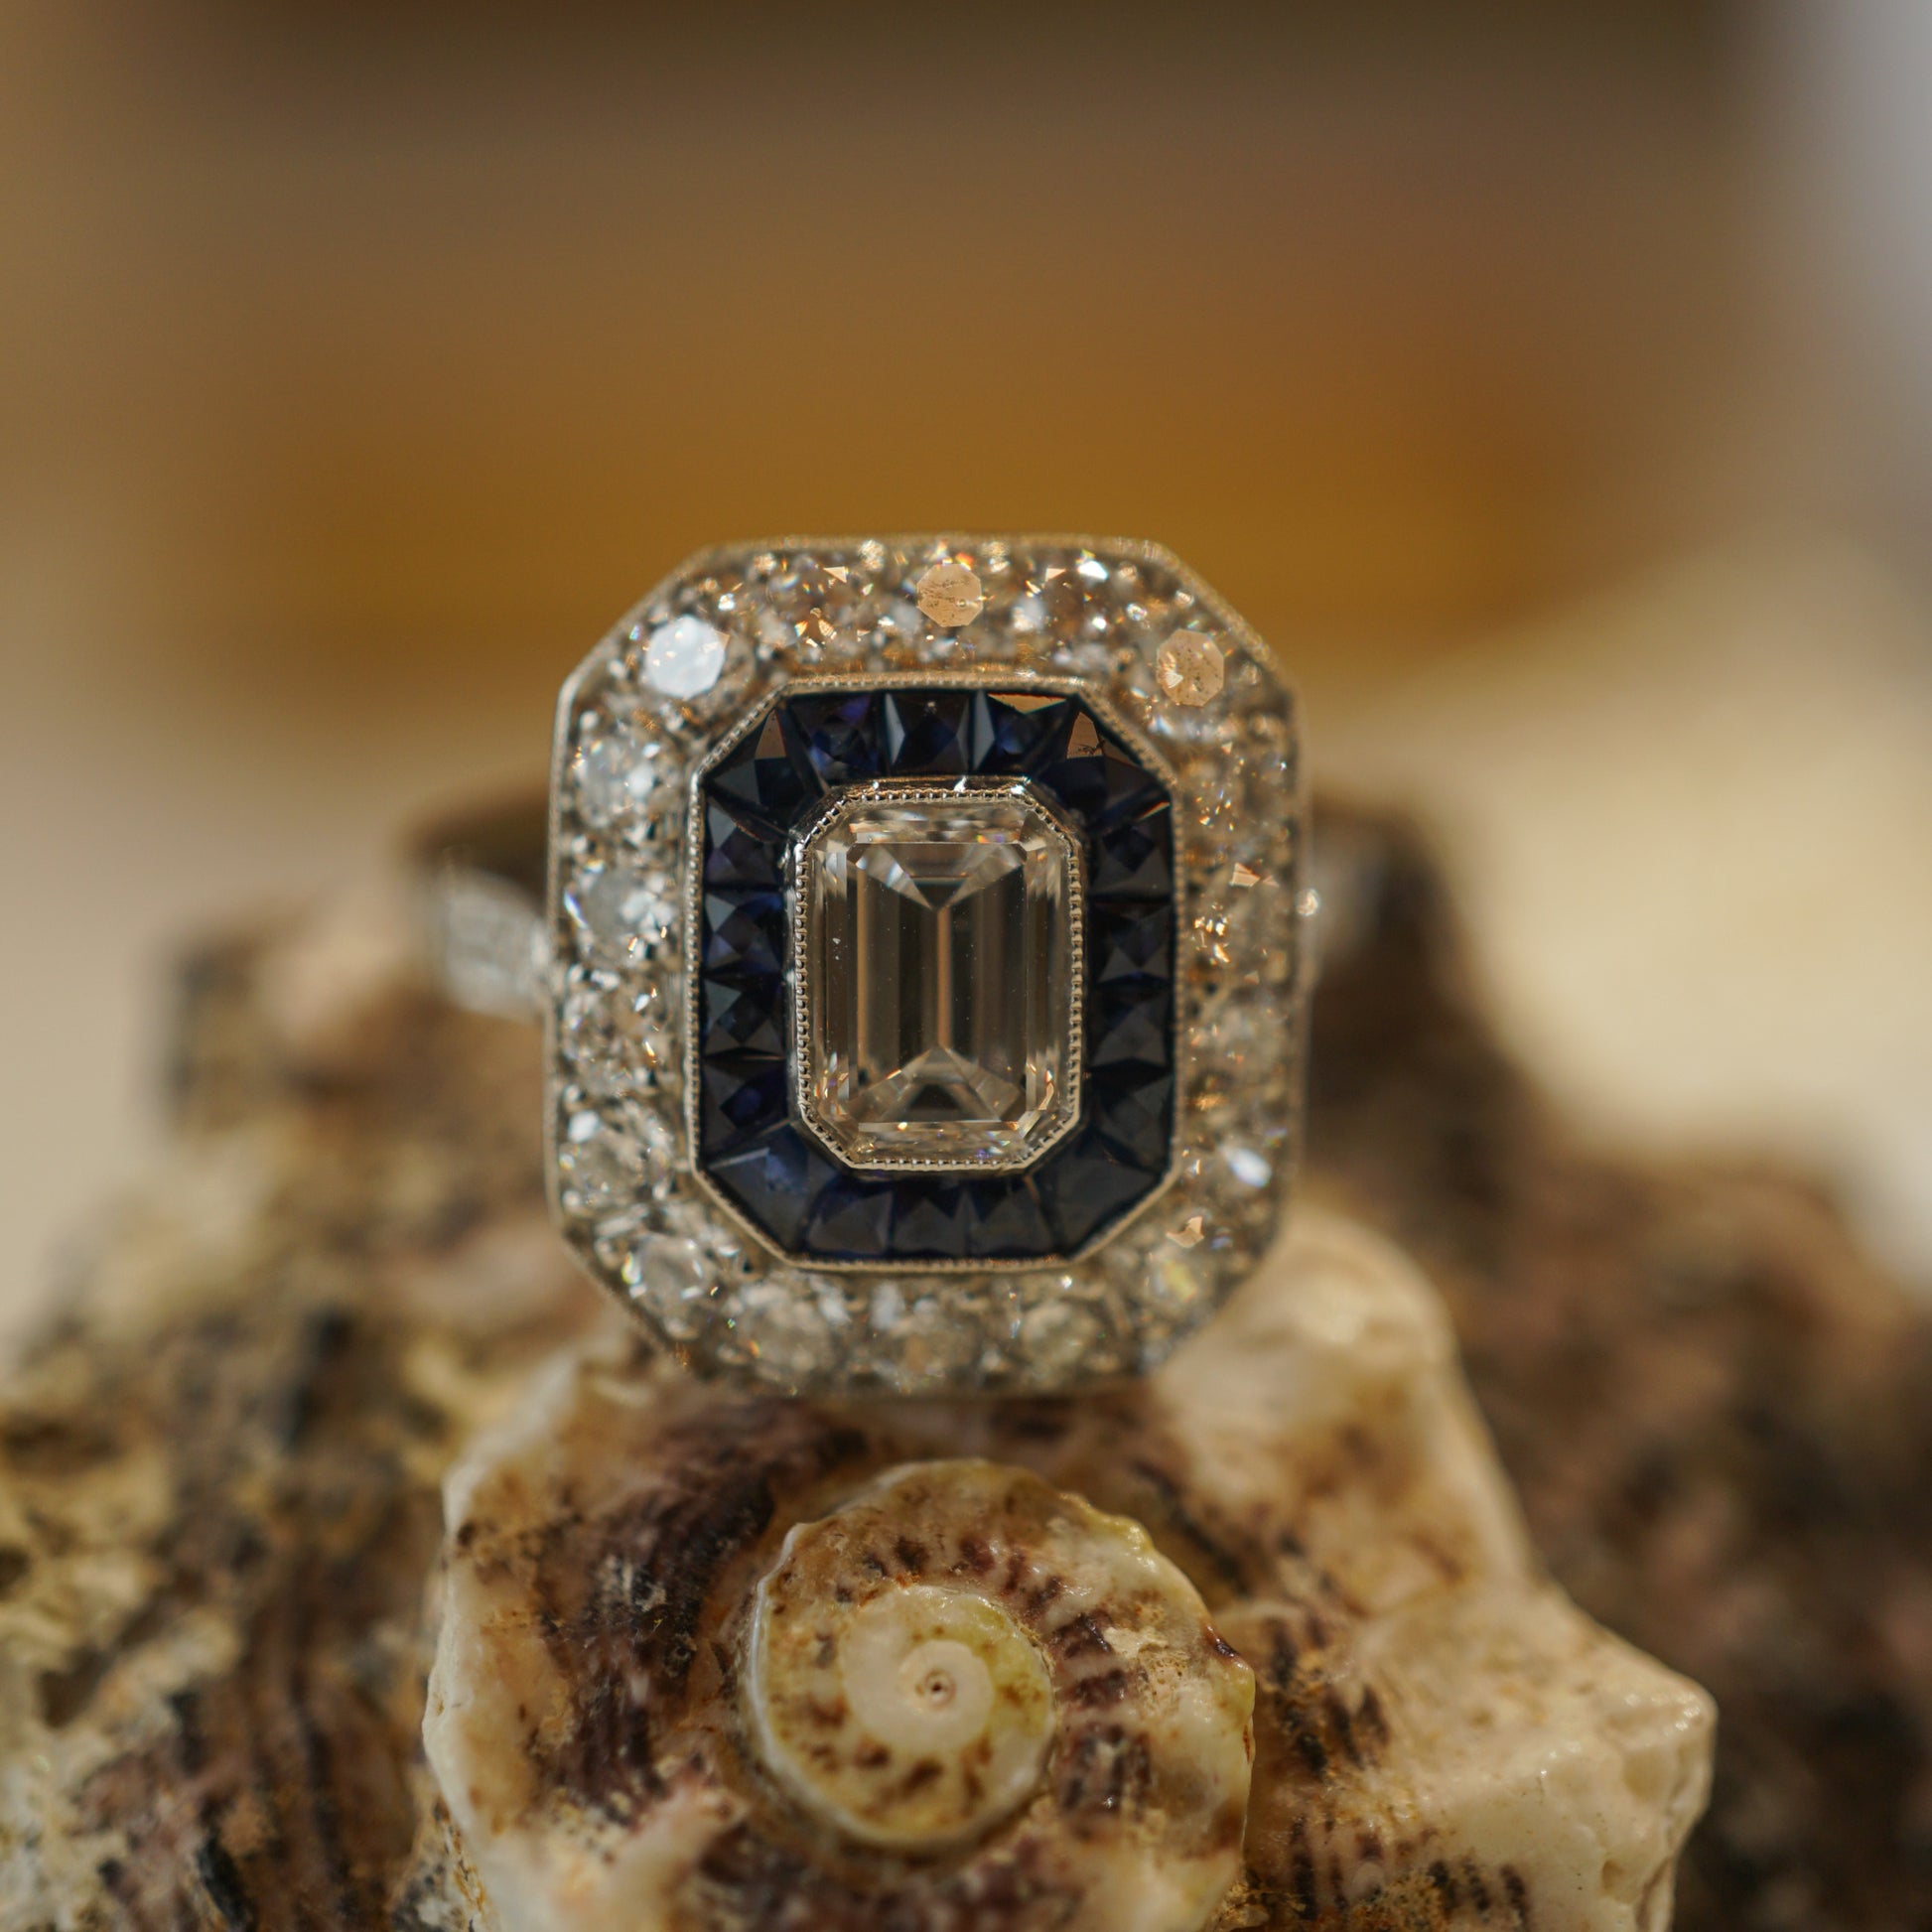 .58 Emerald Cut Diamond and Sapphire Engagement Ring in PlatinumComposition: PlatinumRing Size: 7Total Diamond Weight: 1.34 ctTotal Gram Weight: 4.6 g